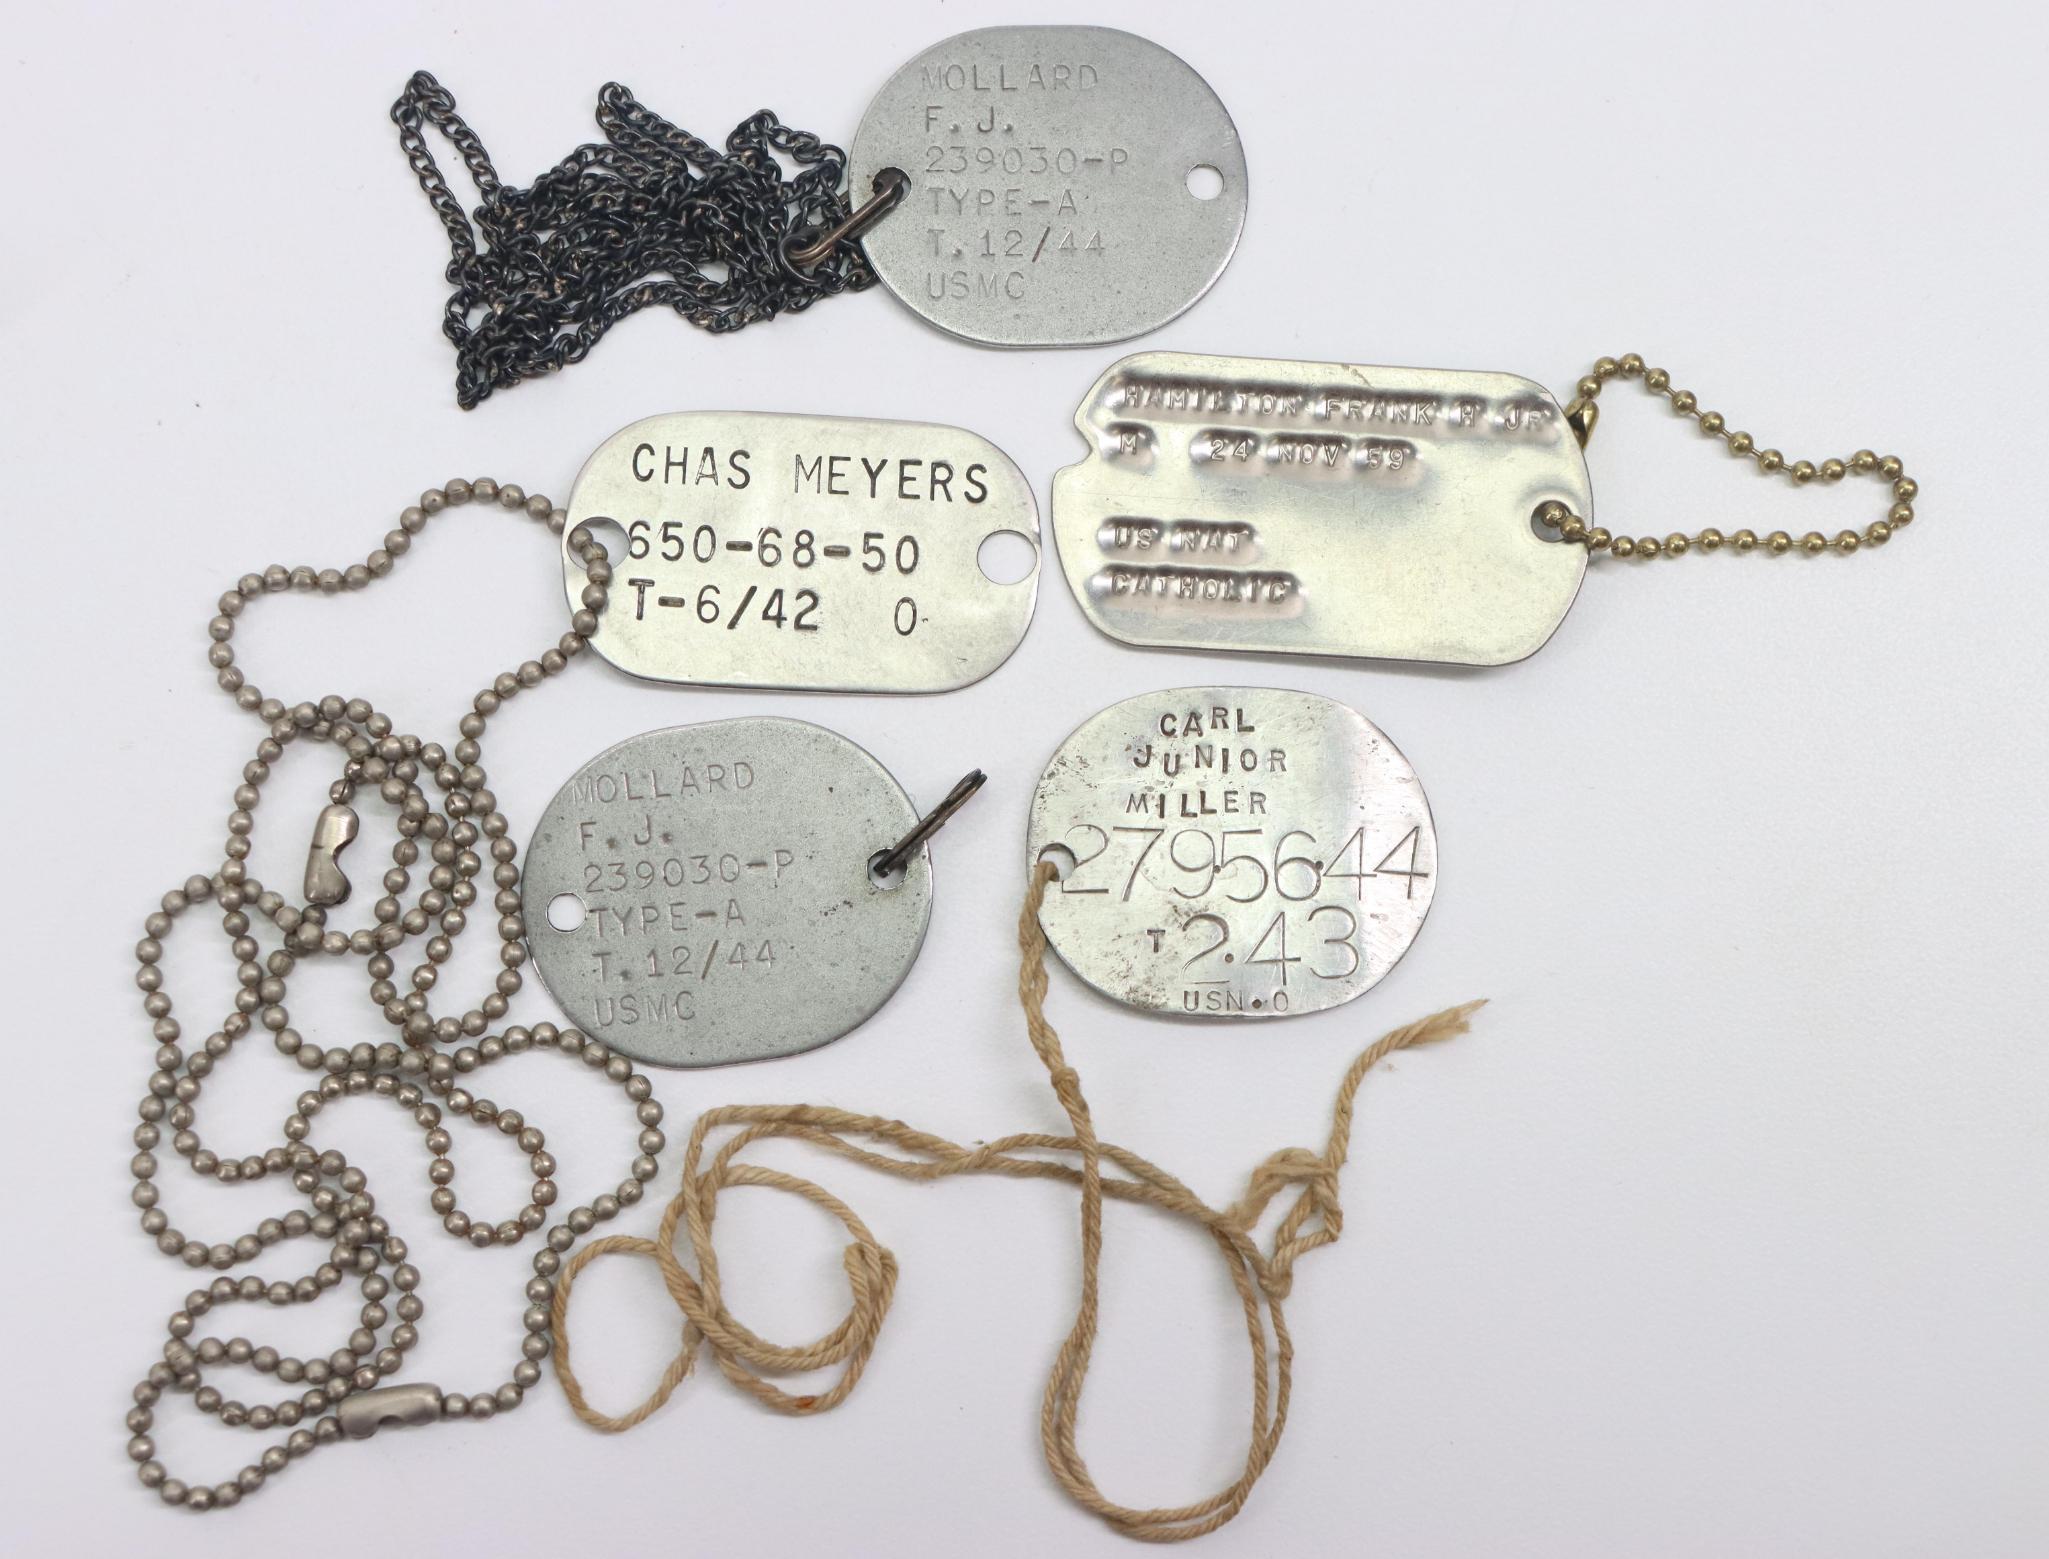 US Military Dog Tags, Pins, Medals And More